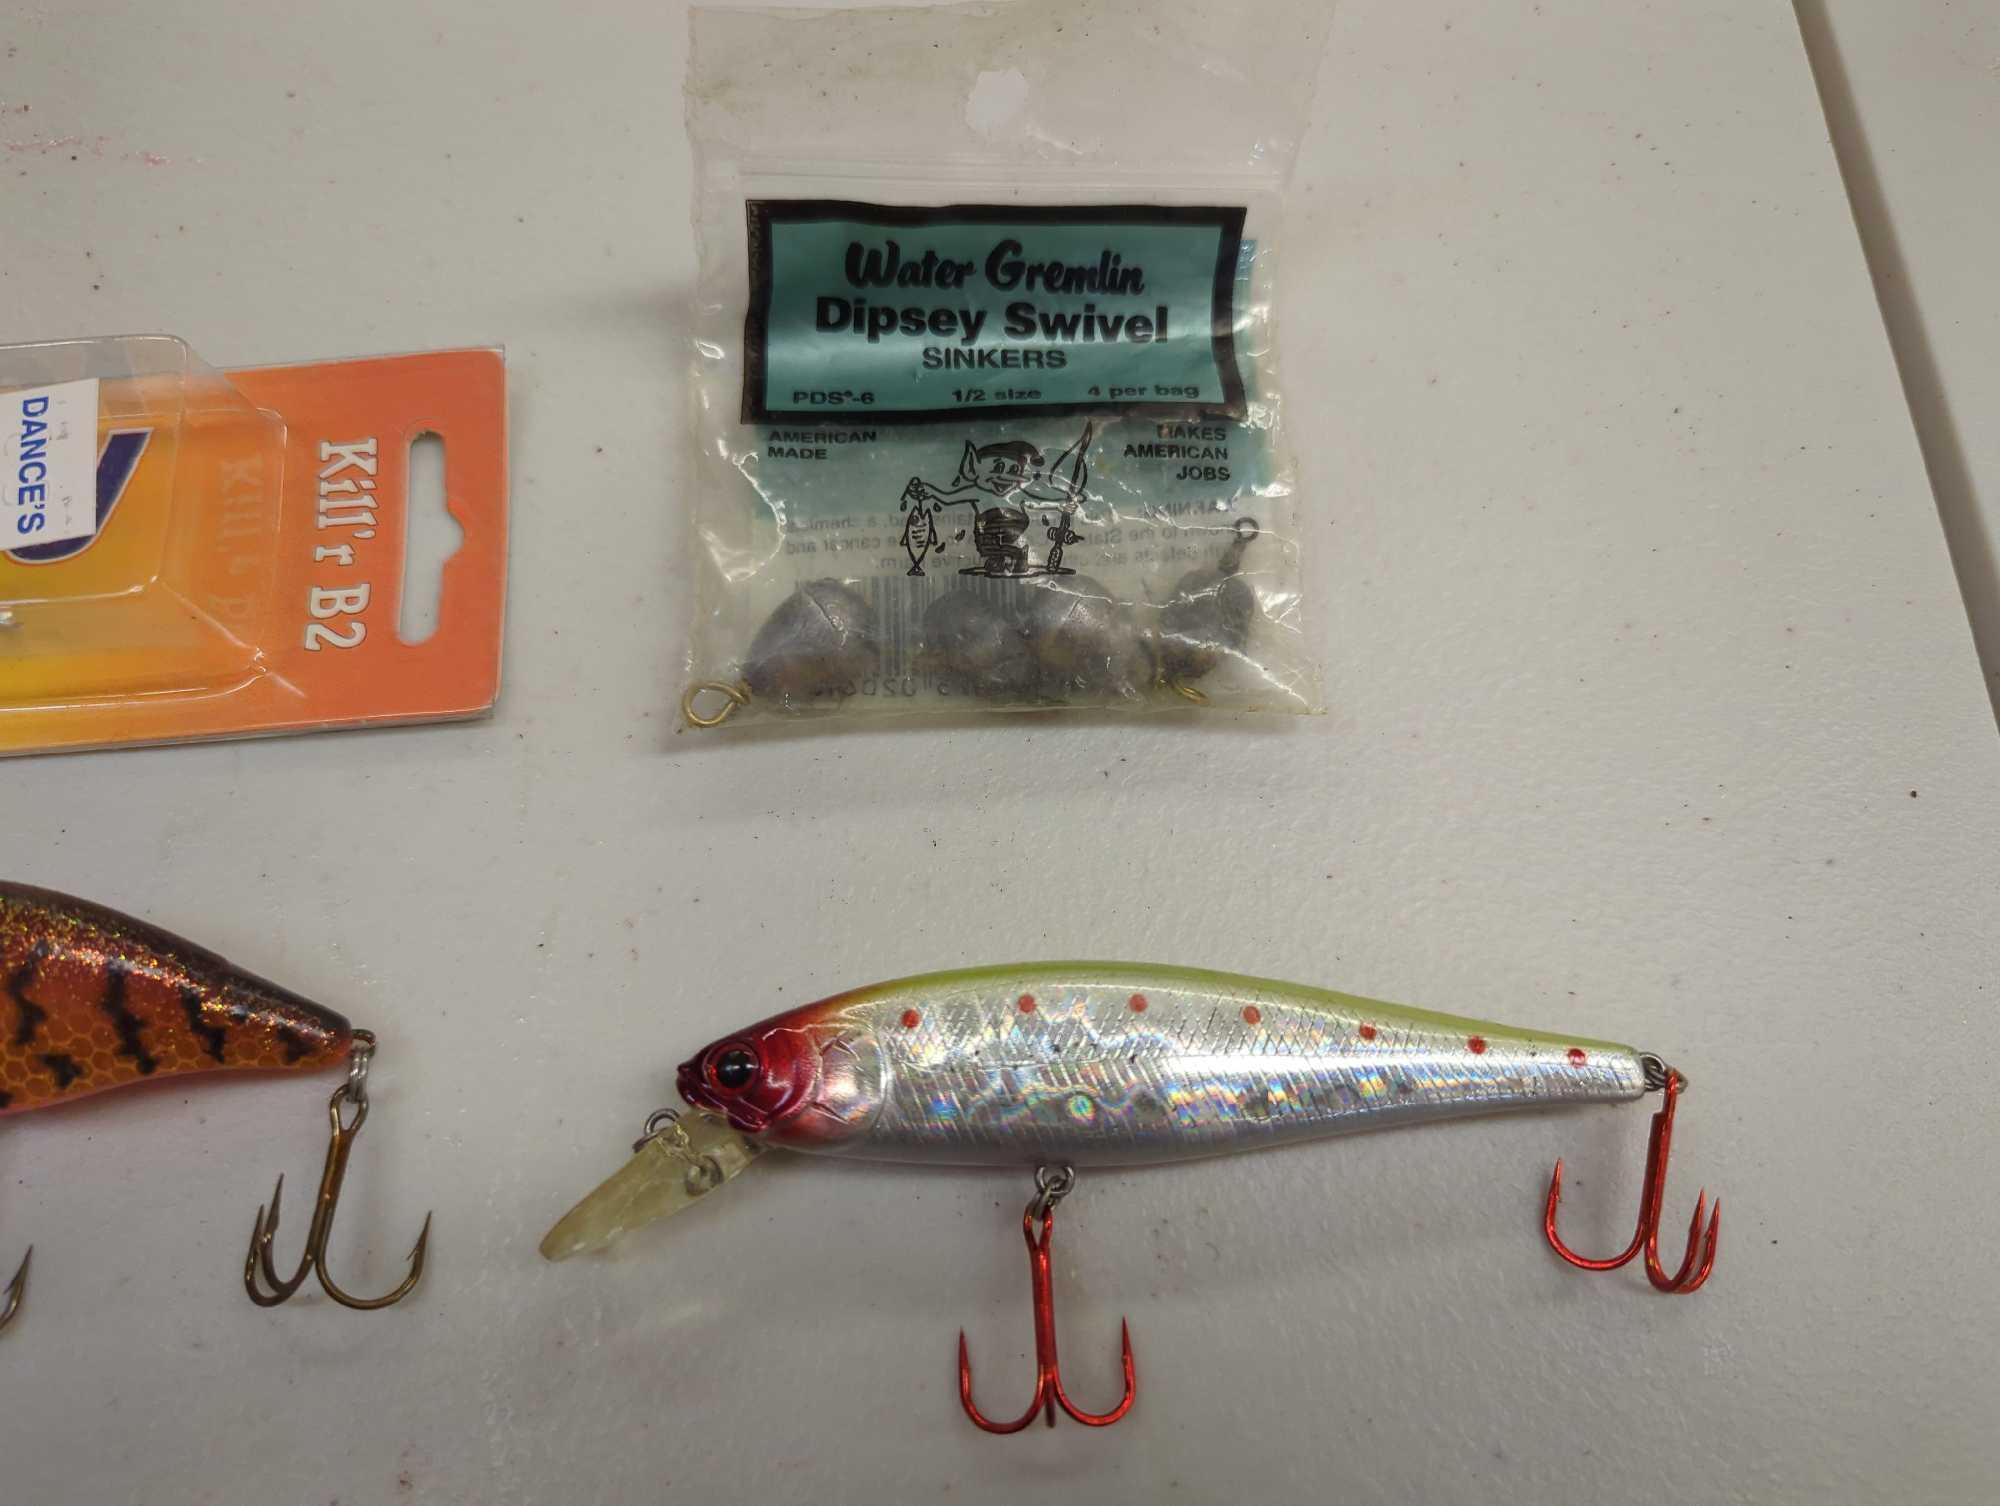 Tackle Box and contents including various fishing lures and other fishing accessories. Comes as is